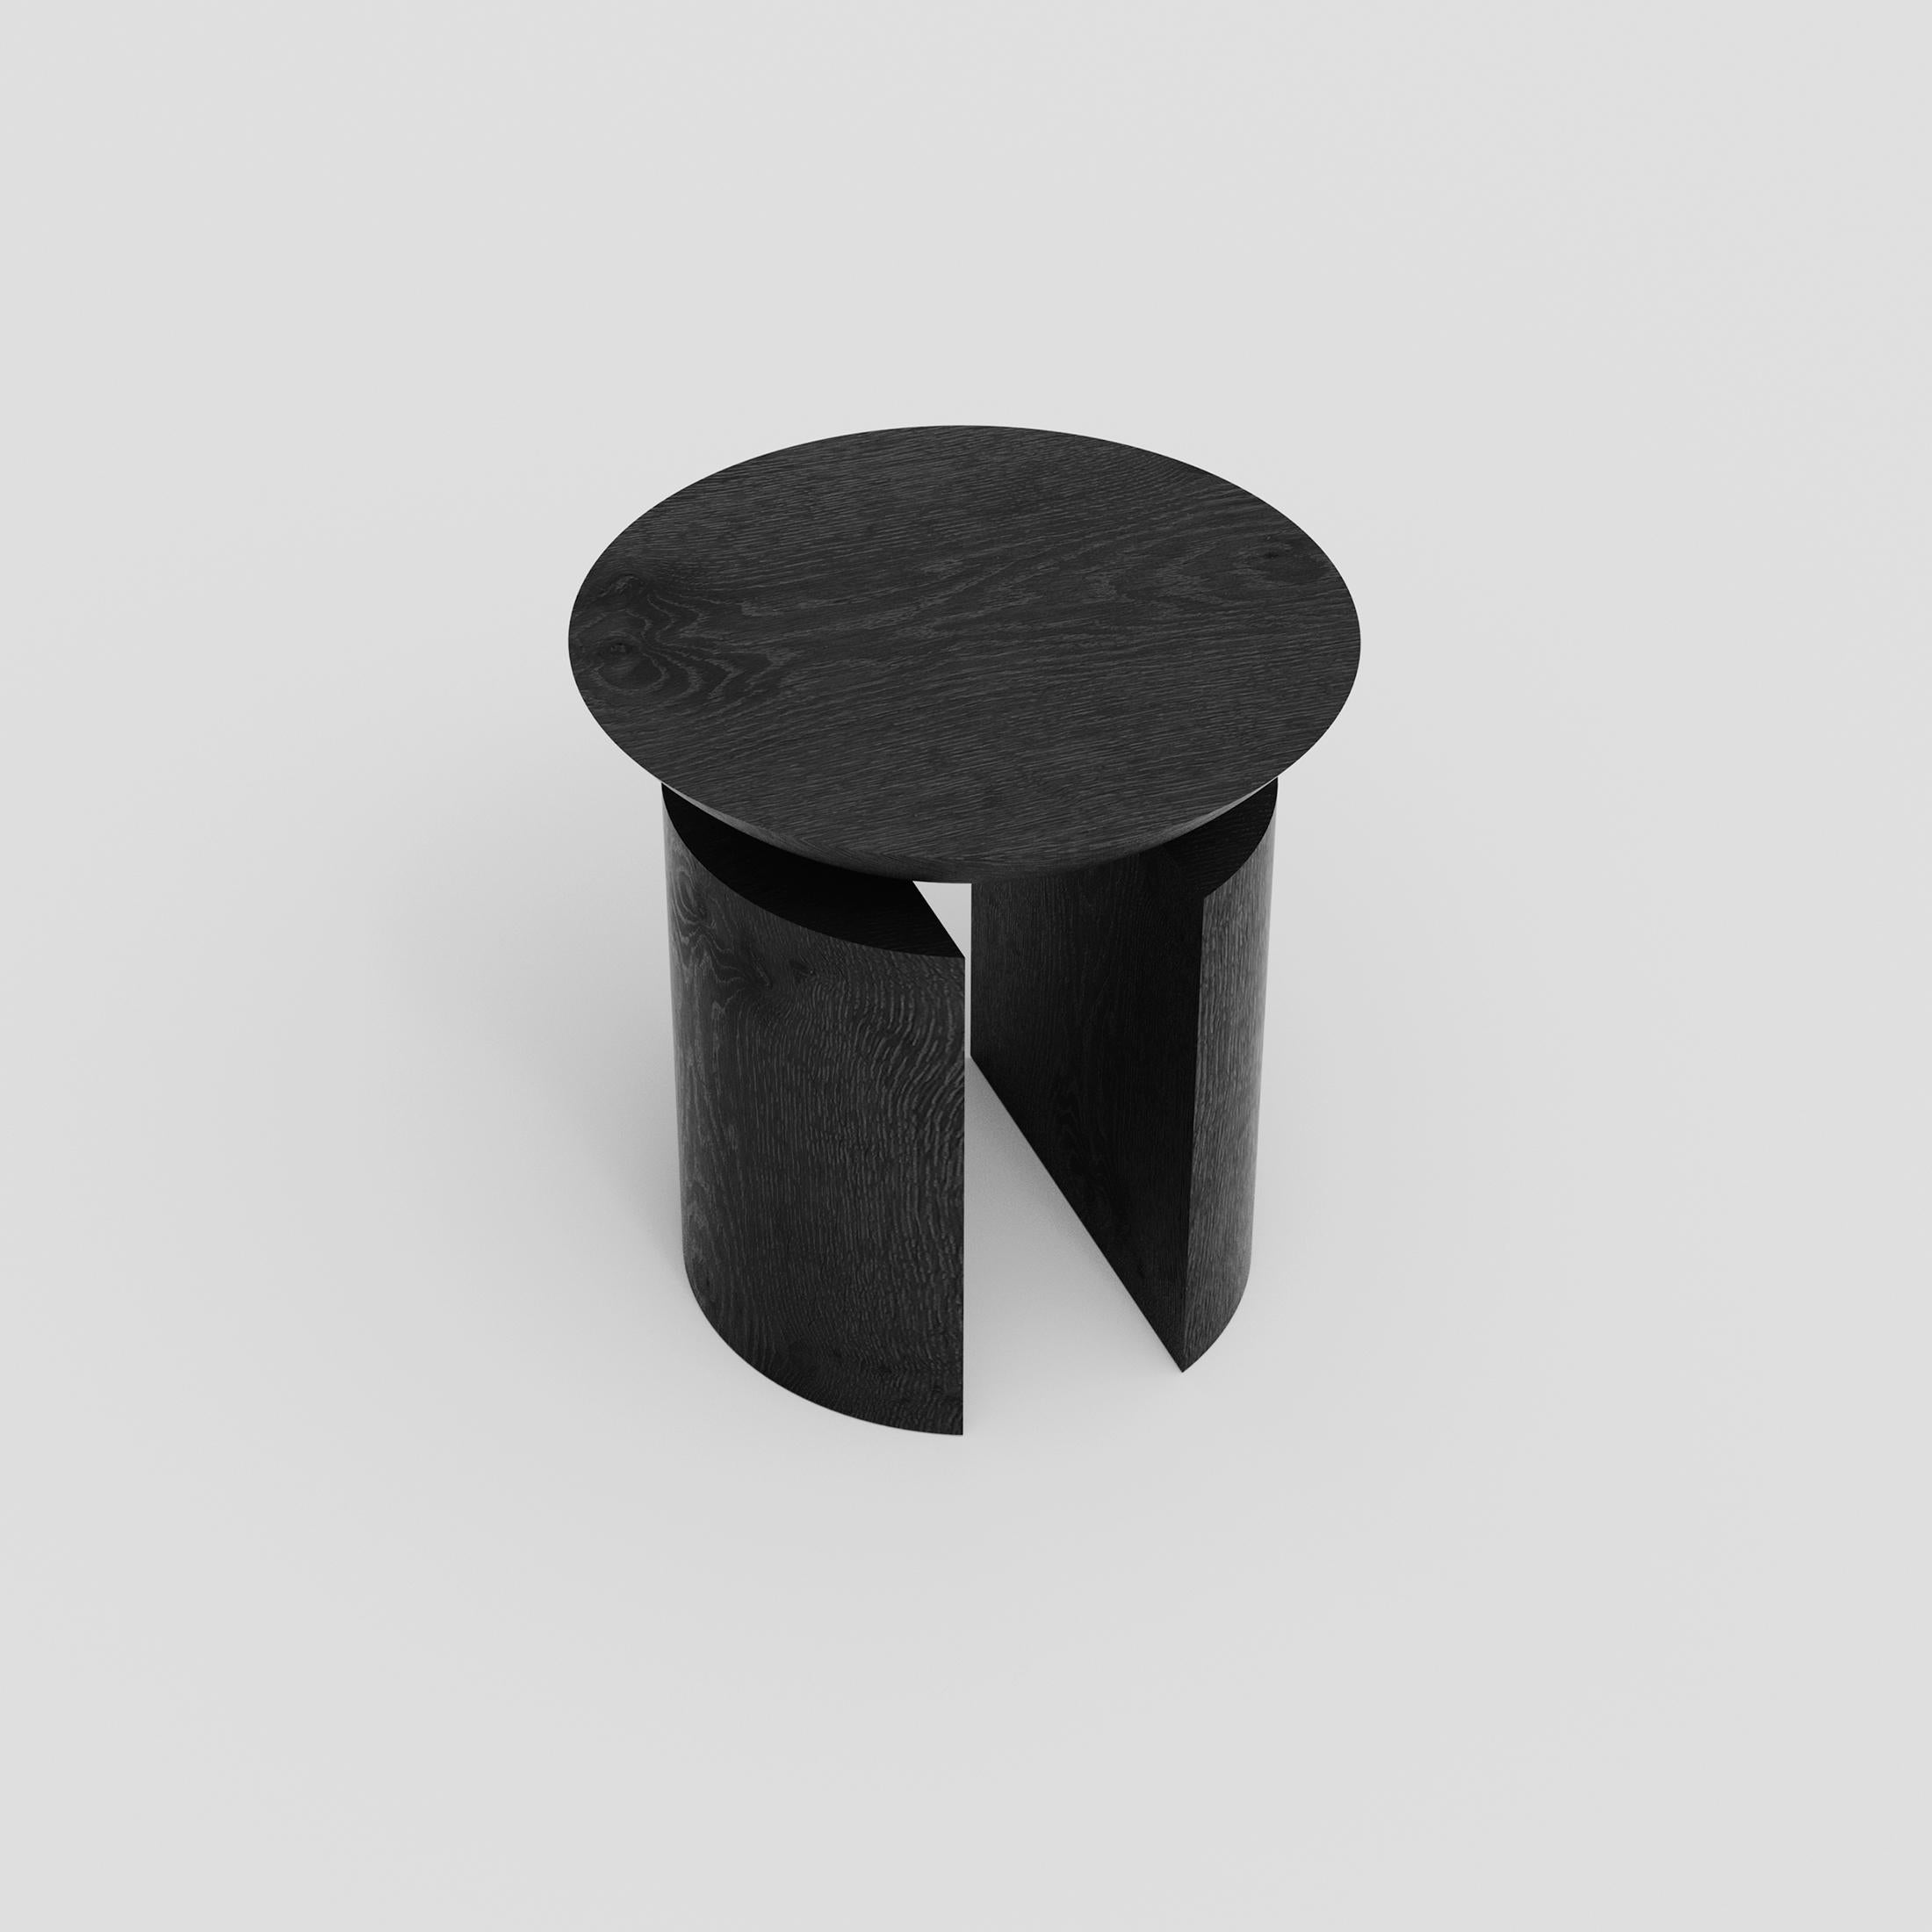 Hand-Crafted Anca Sculptural Side Table or Stool in Tropical Hardwood by Pedro Paulo Venzon